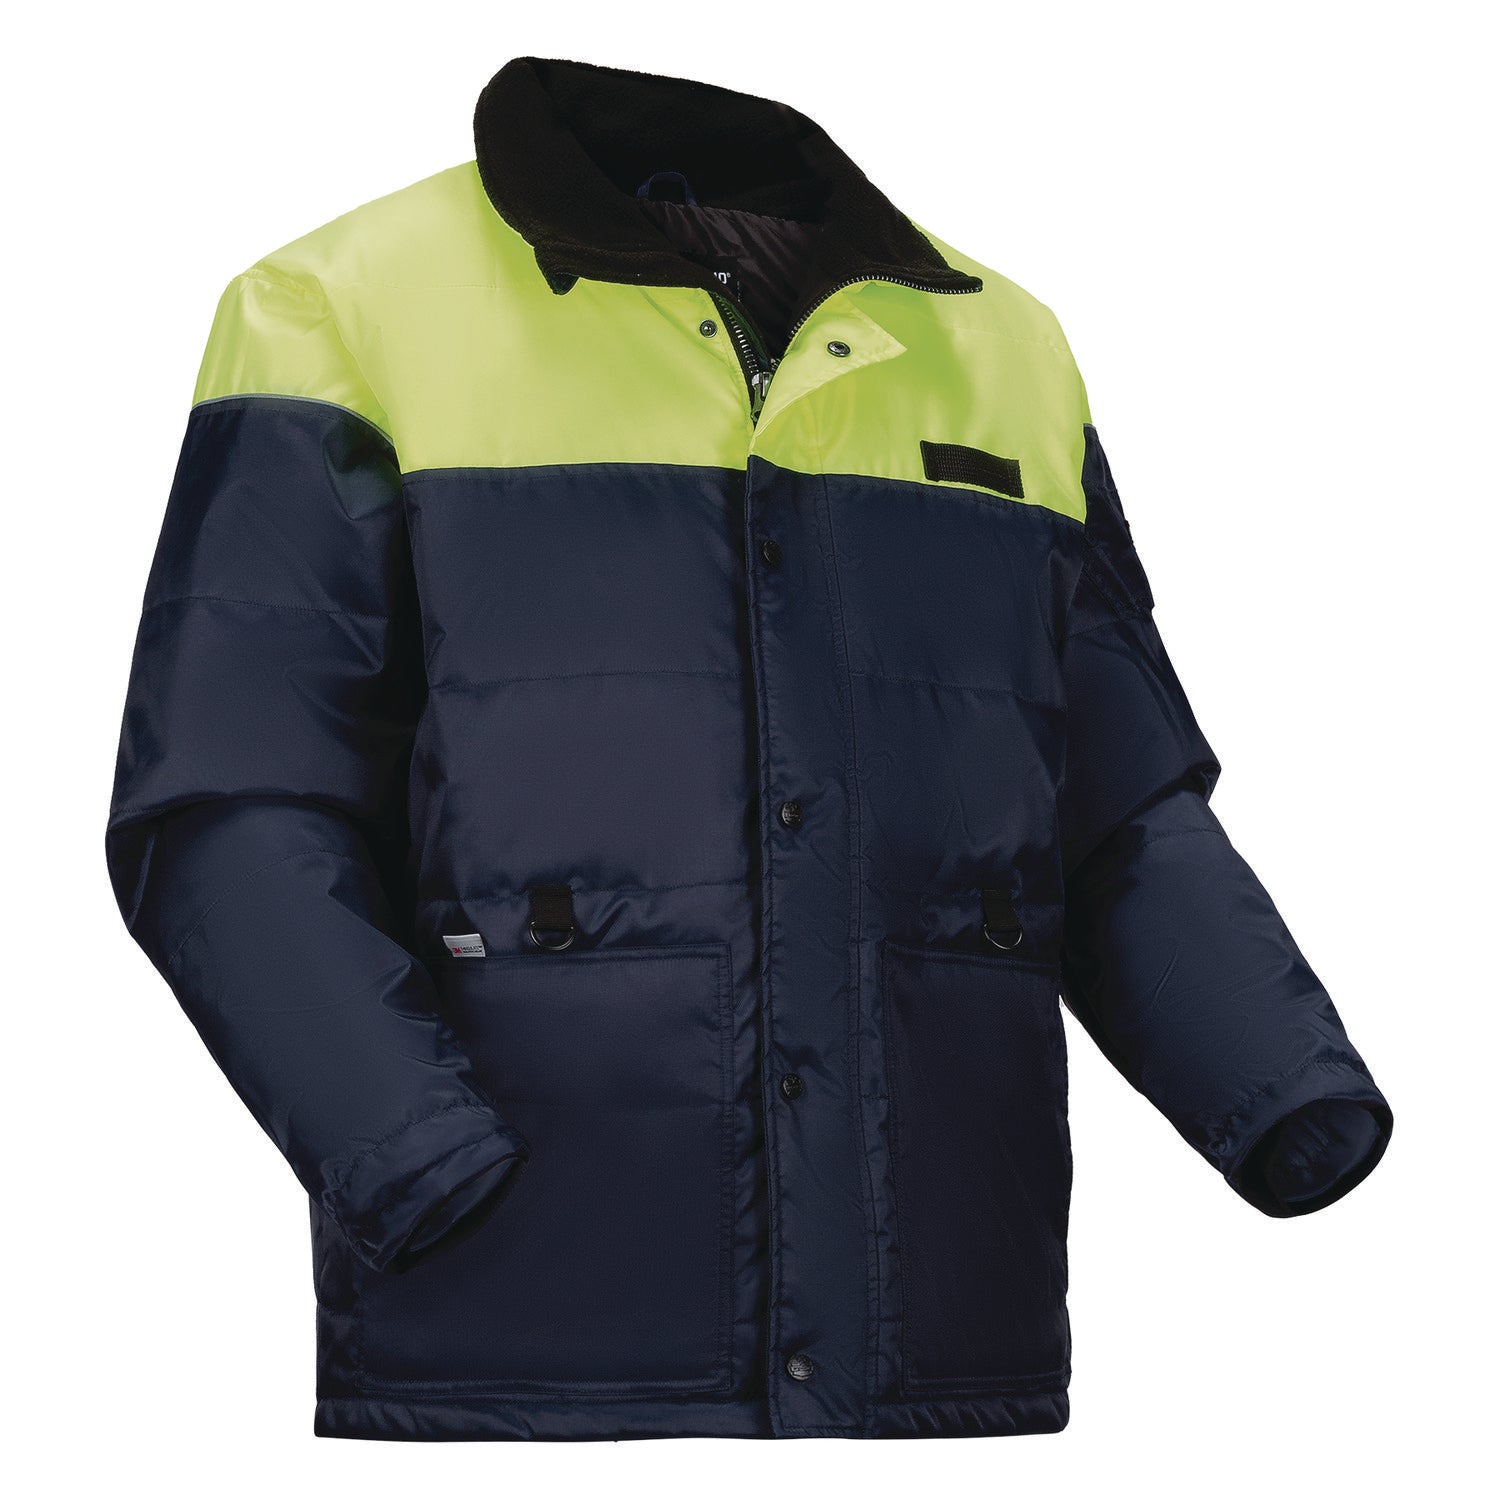 n-ferno-6476-insulated-freezer-jacket-x-small-navy-ships-in-1-3-business-days_ego41251 - 3